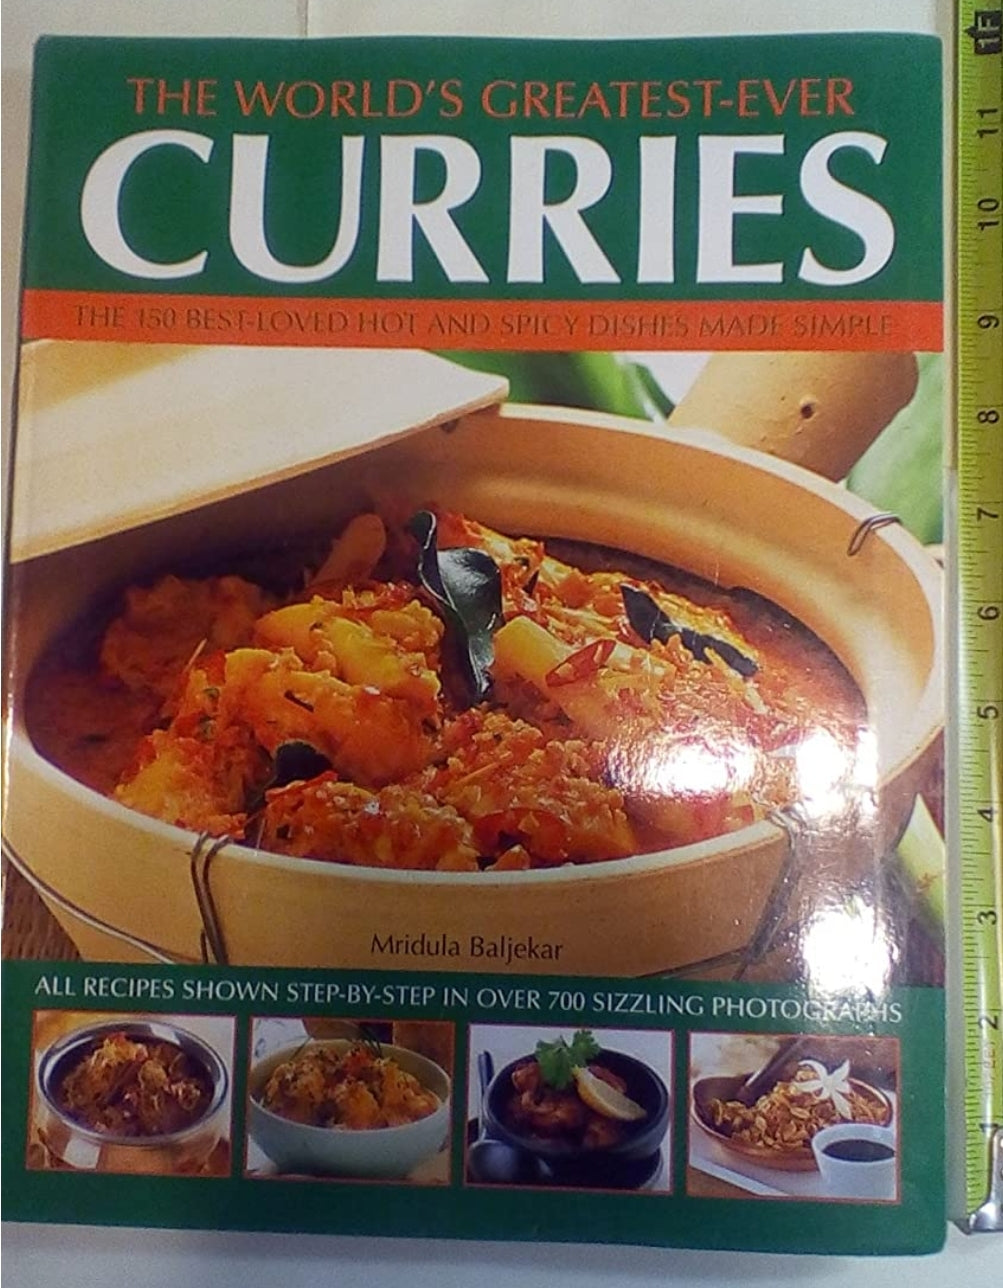 The World's Greatest-ever Curries: All Recipes Shown Step-by-step in Over 700 Photographs